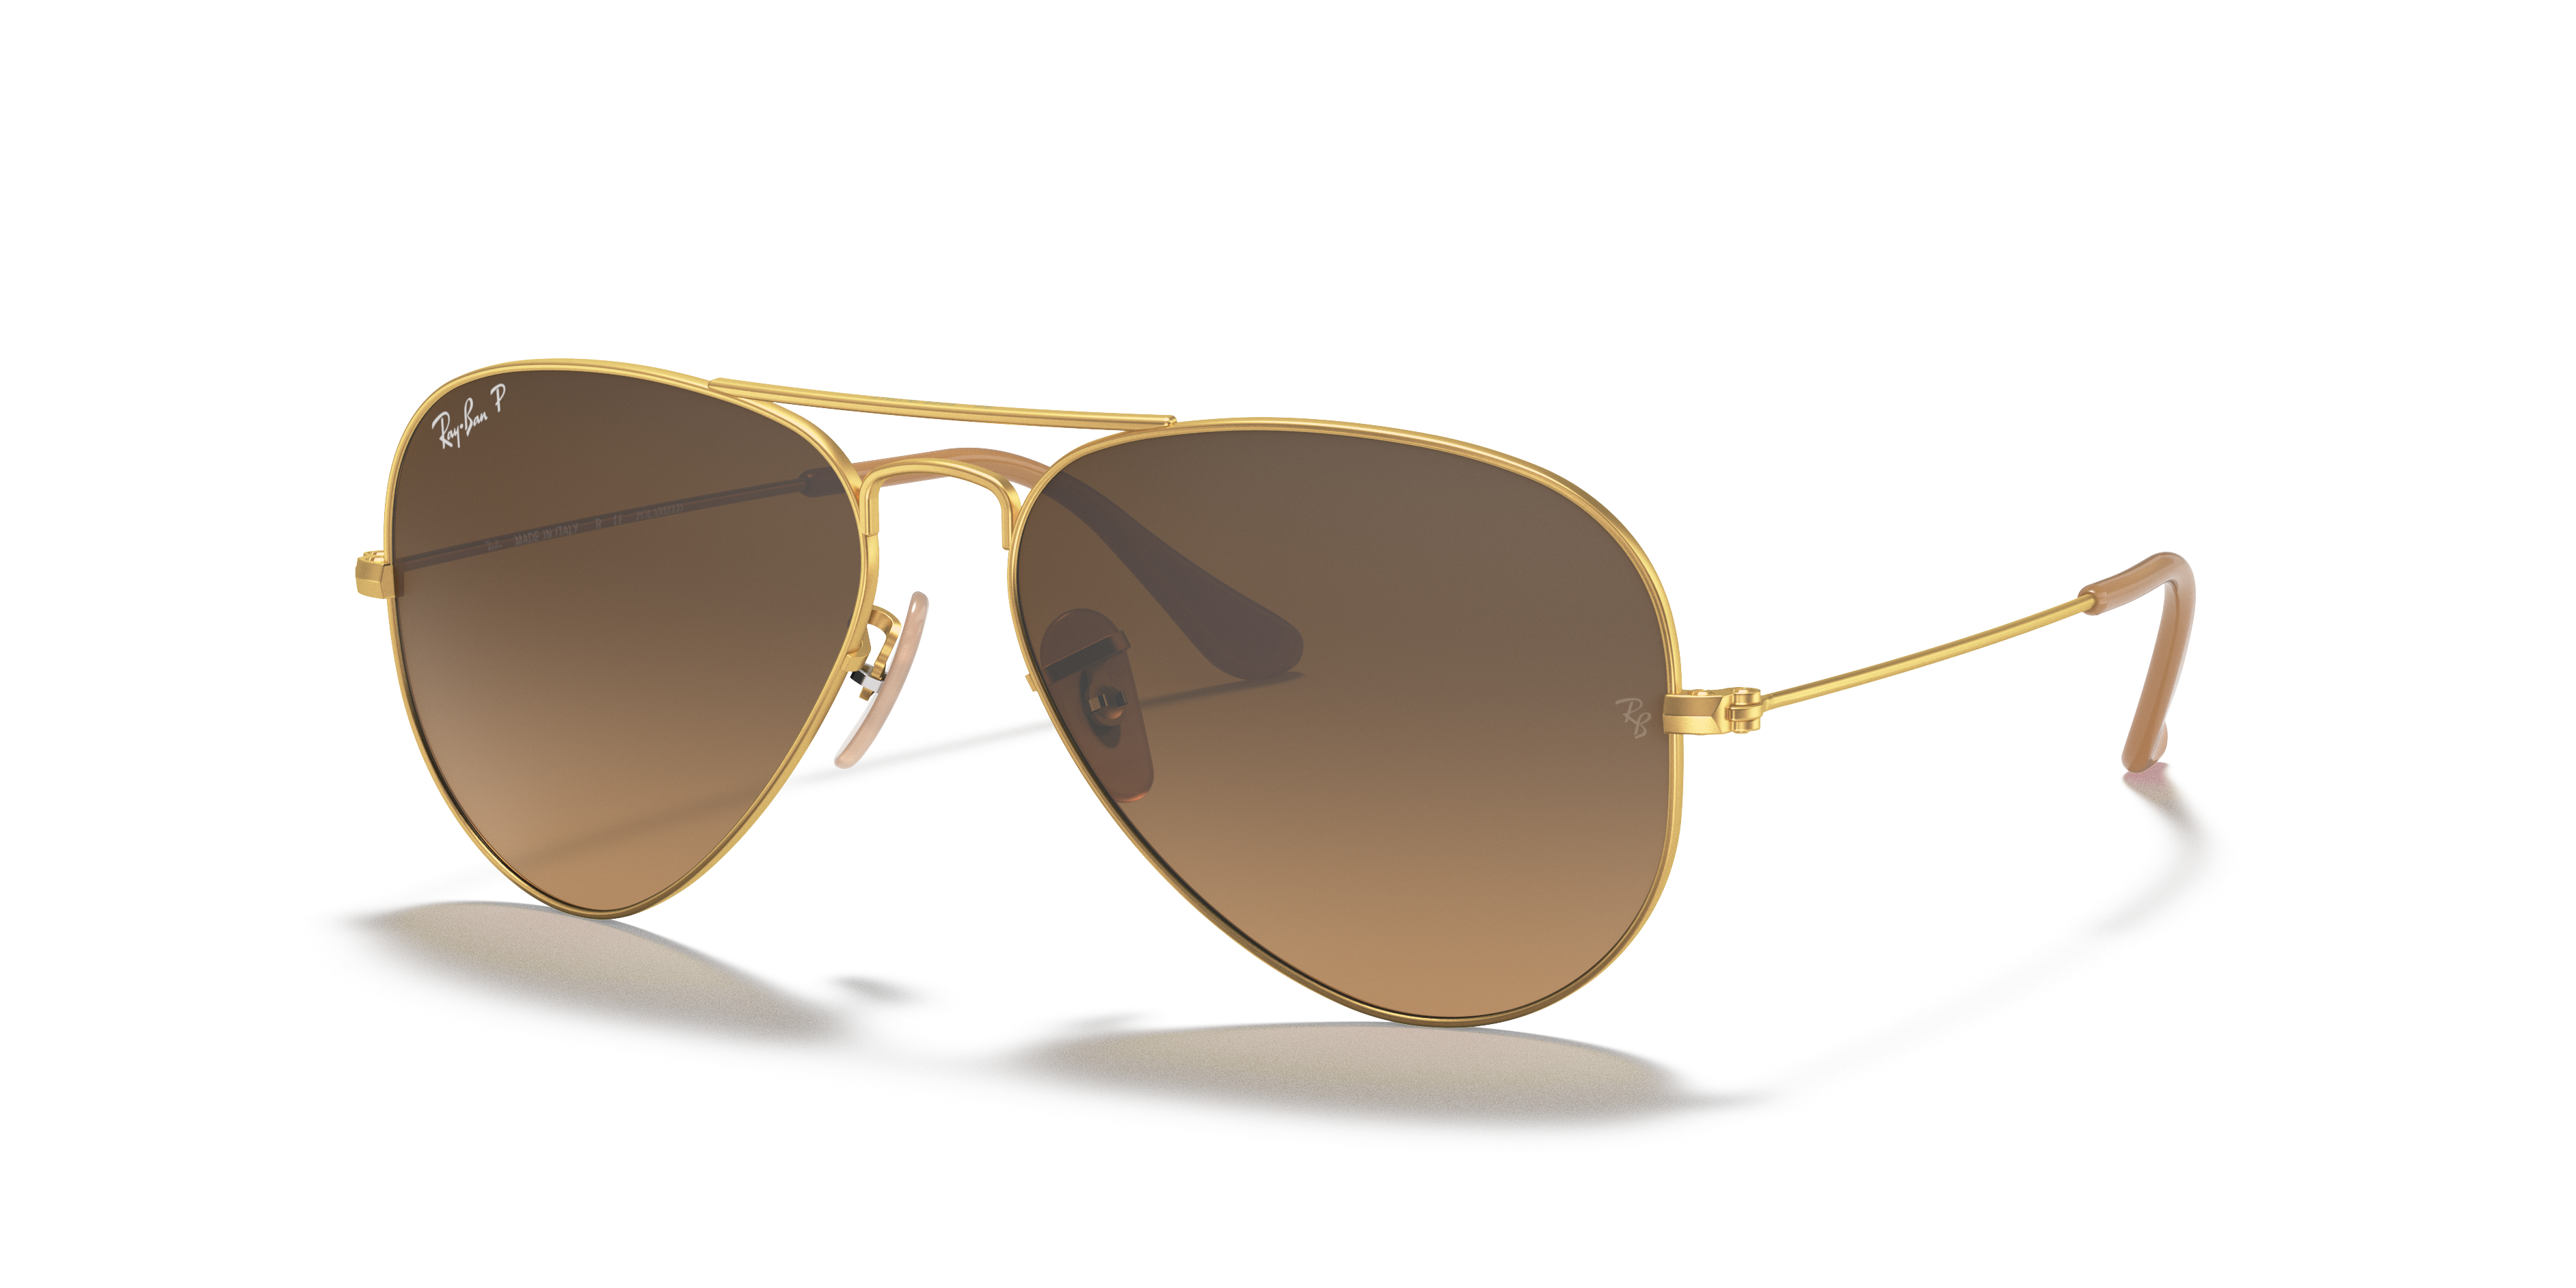 Ray-Ban Unisex Rb3025 Gold Size: Standard